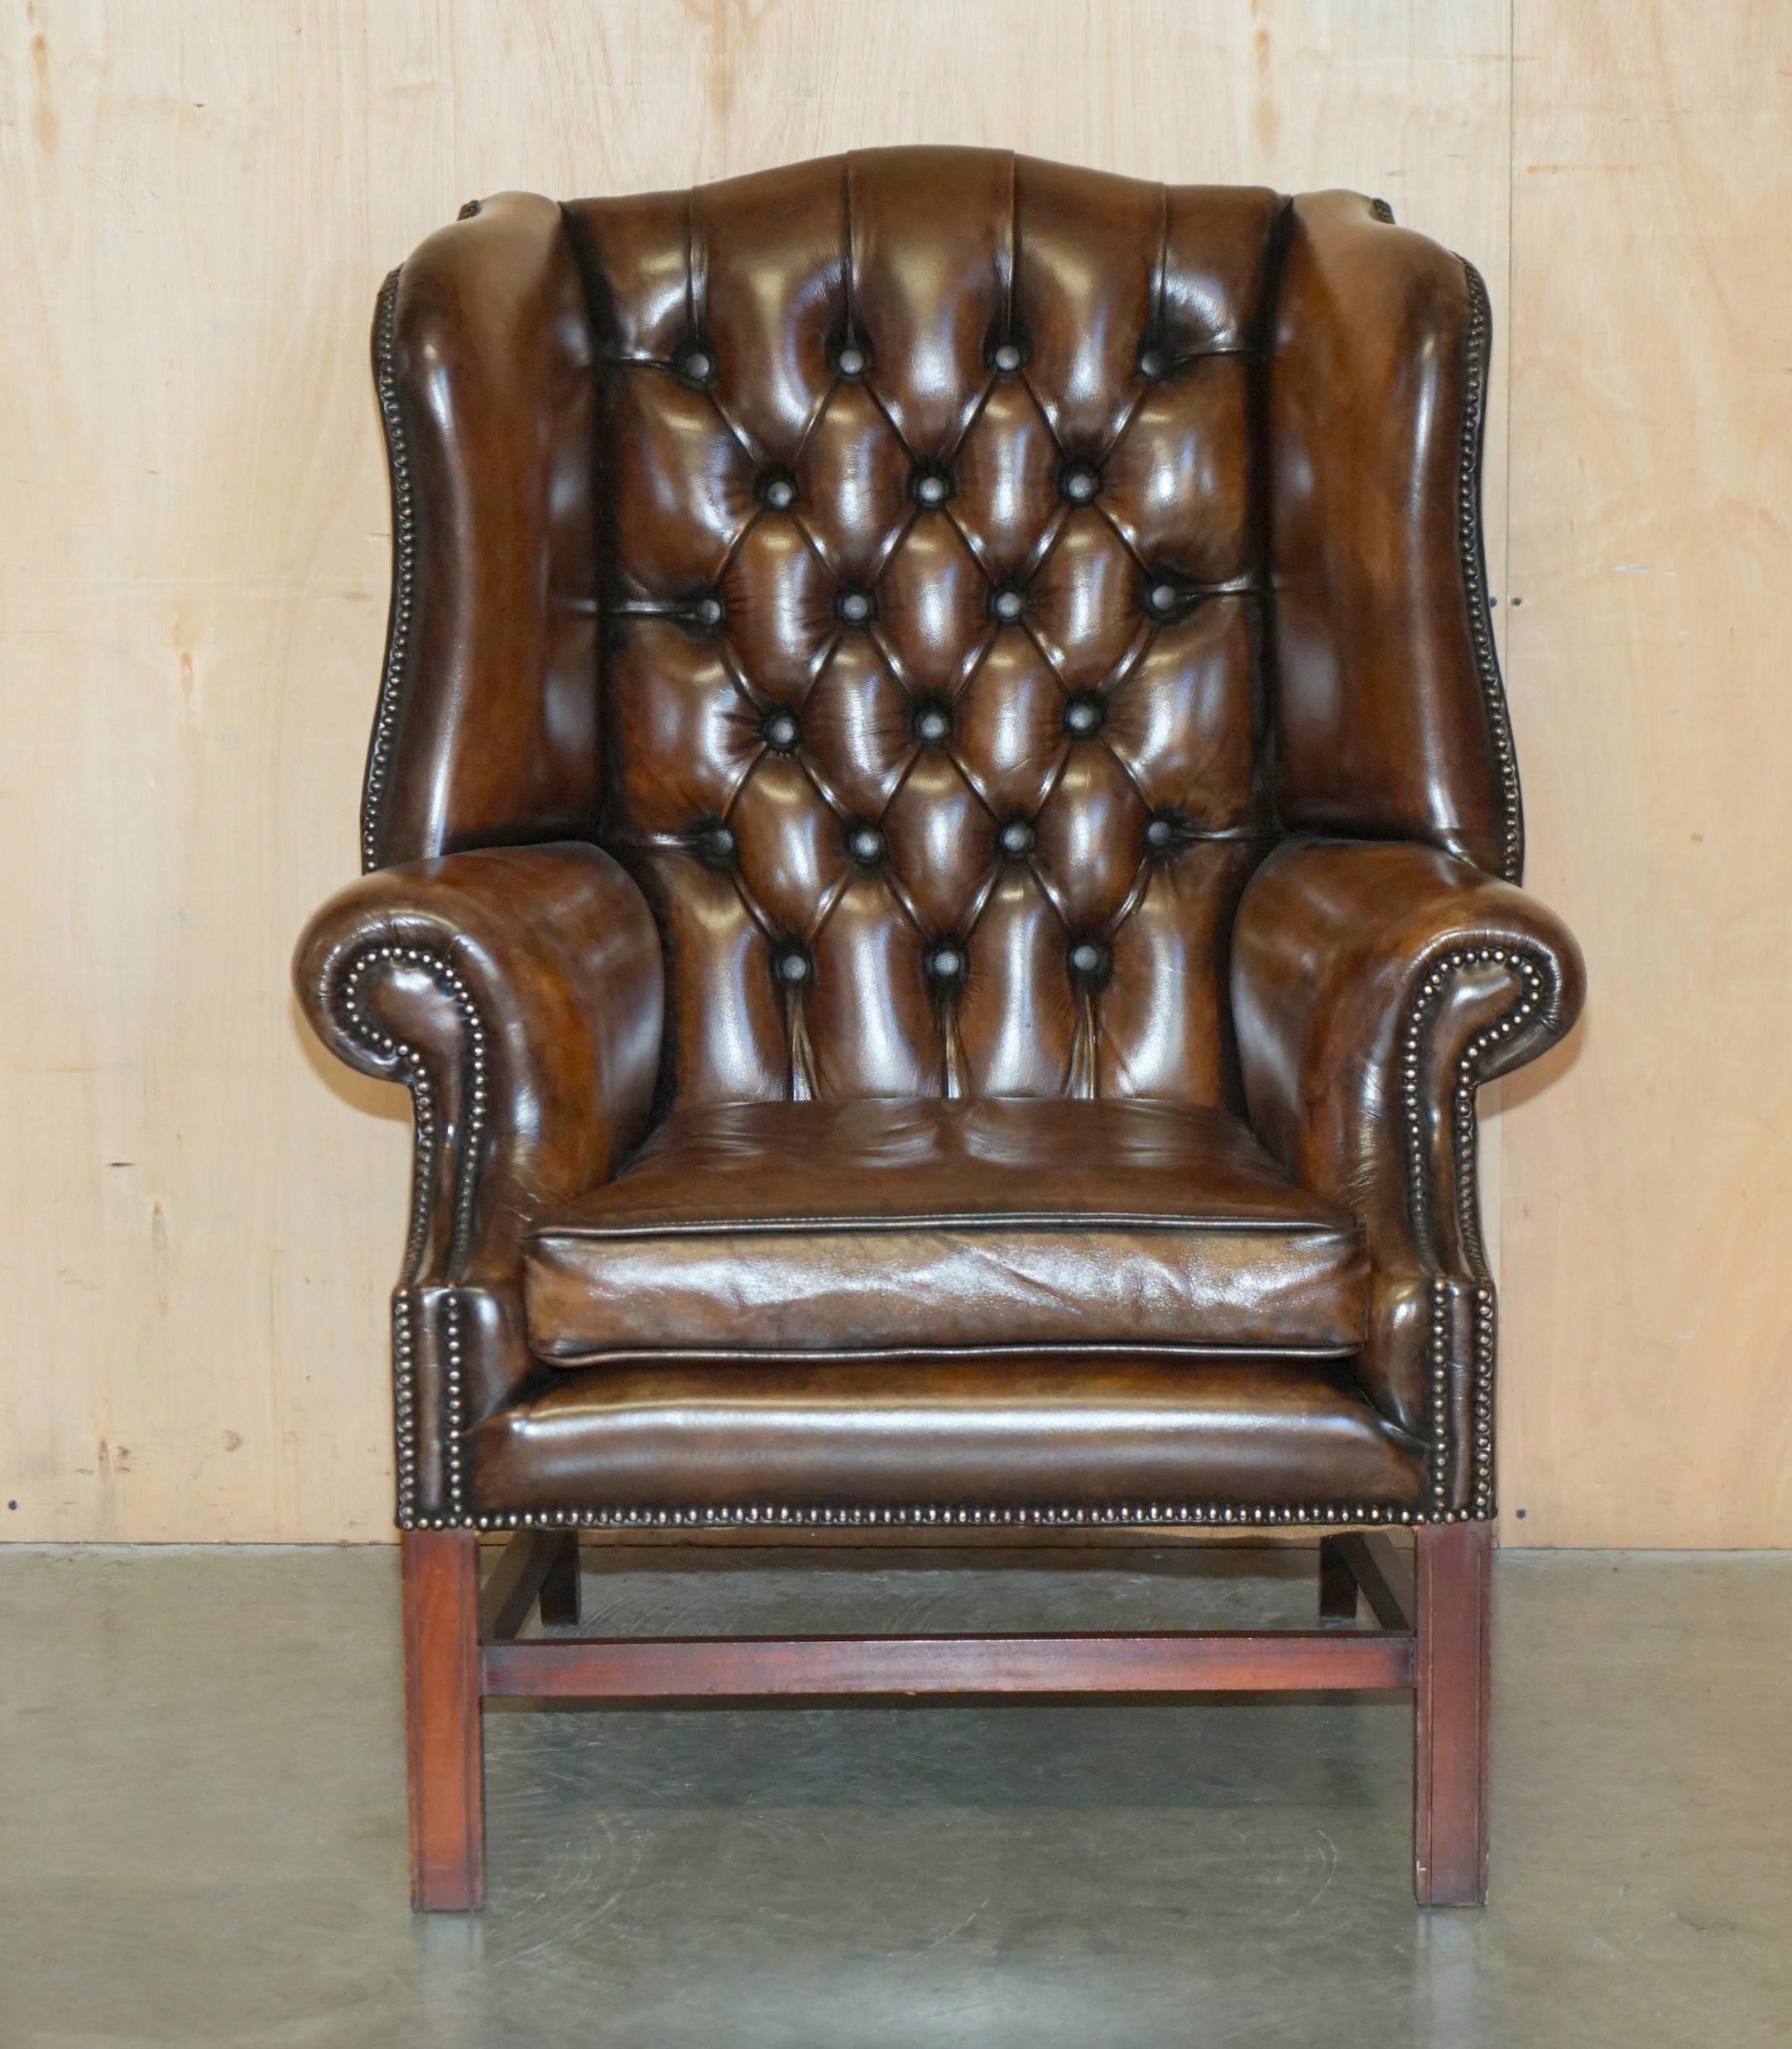 Royal House Antiques

Royal House Antiques is delighted to offer for sale this stunning fully restored vintage Chesterfield tufted Cigar brown leather wingback armchair.

Please note the delivery fee listed is just a guide, it covers within the M25